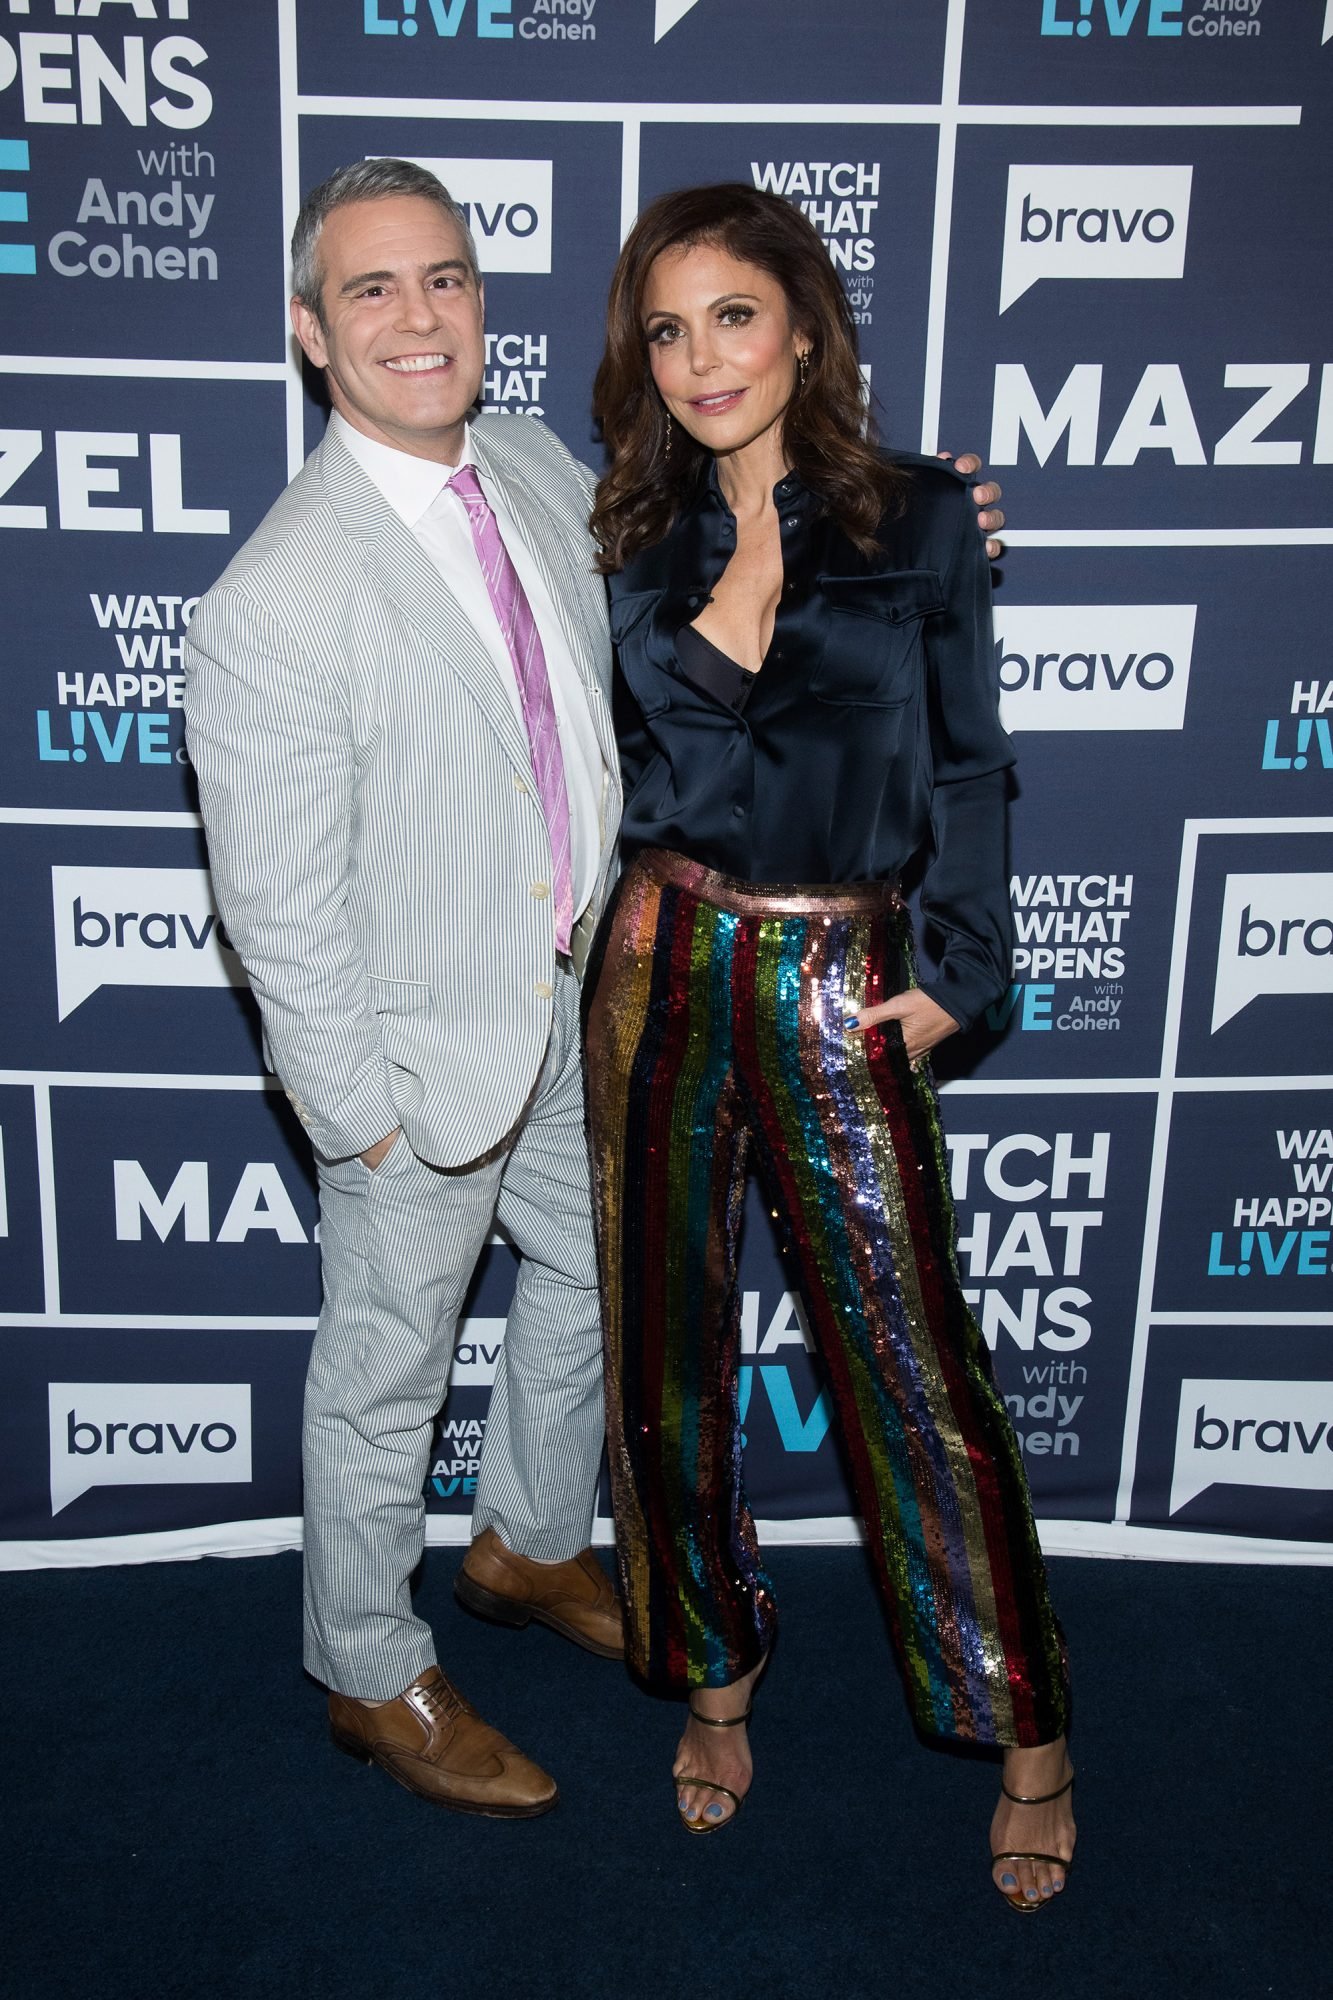 Bethenny Frankel says it was Andy Cohen who told her to marry ex-husband Jason Hoppy, which she called the "worst idea in history."